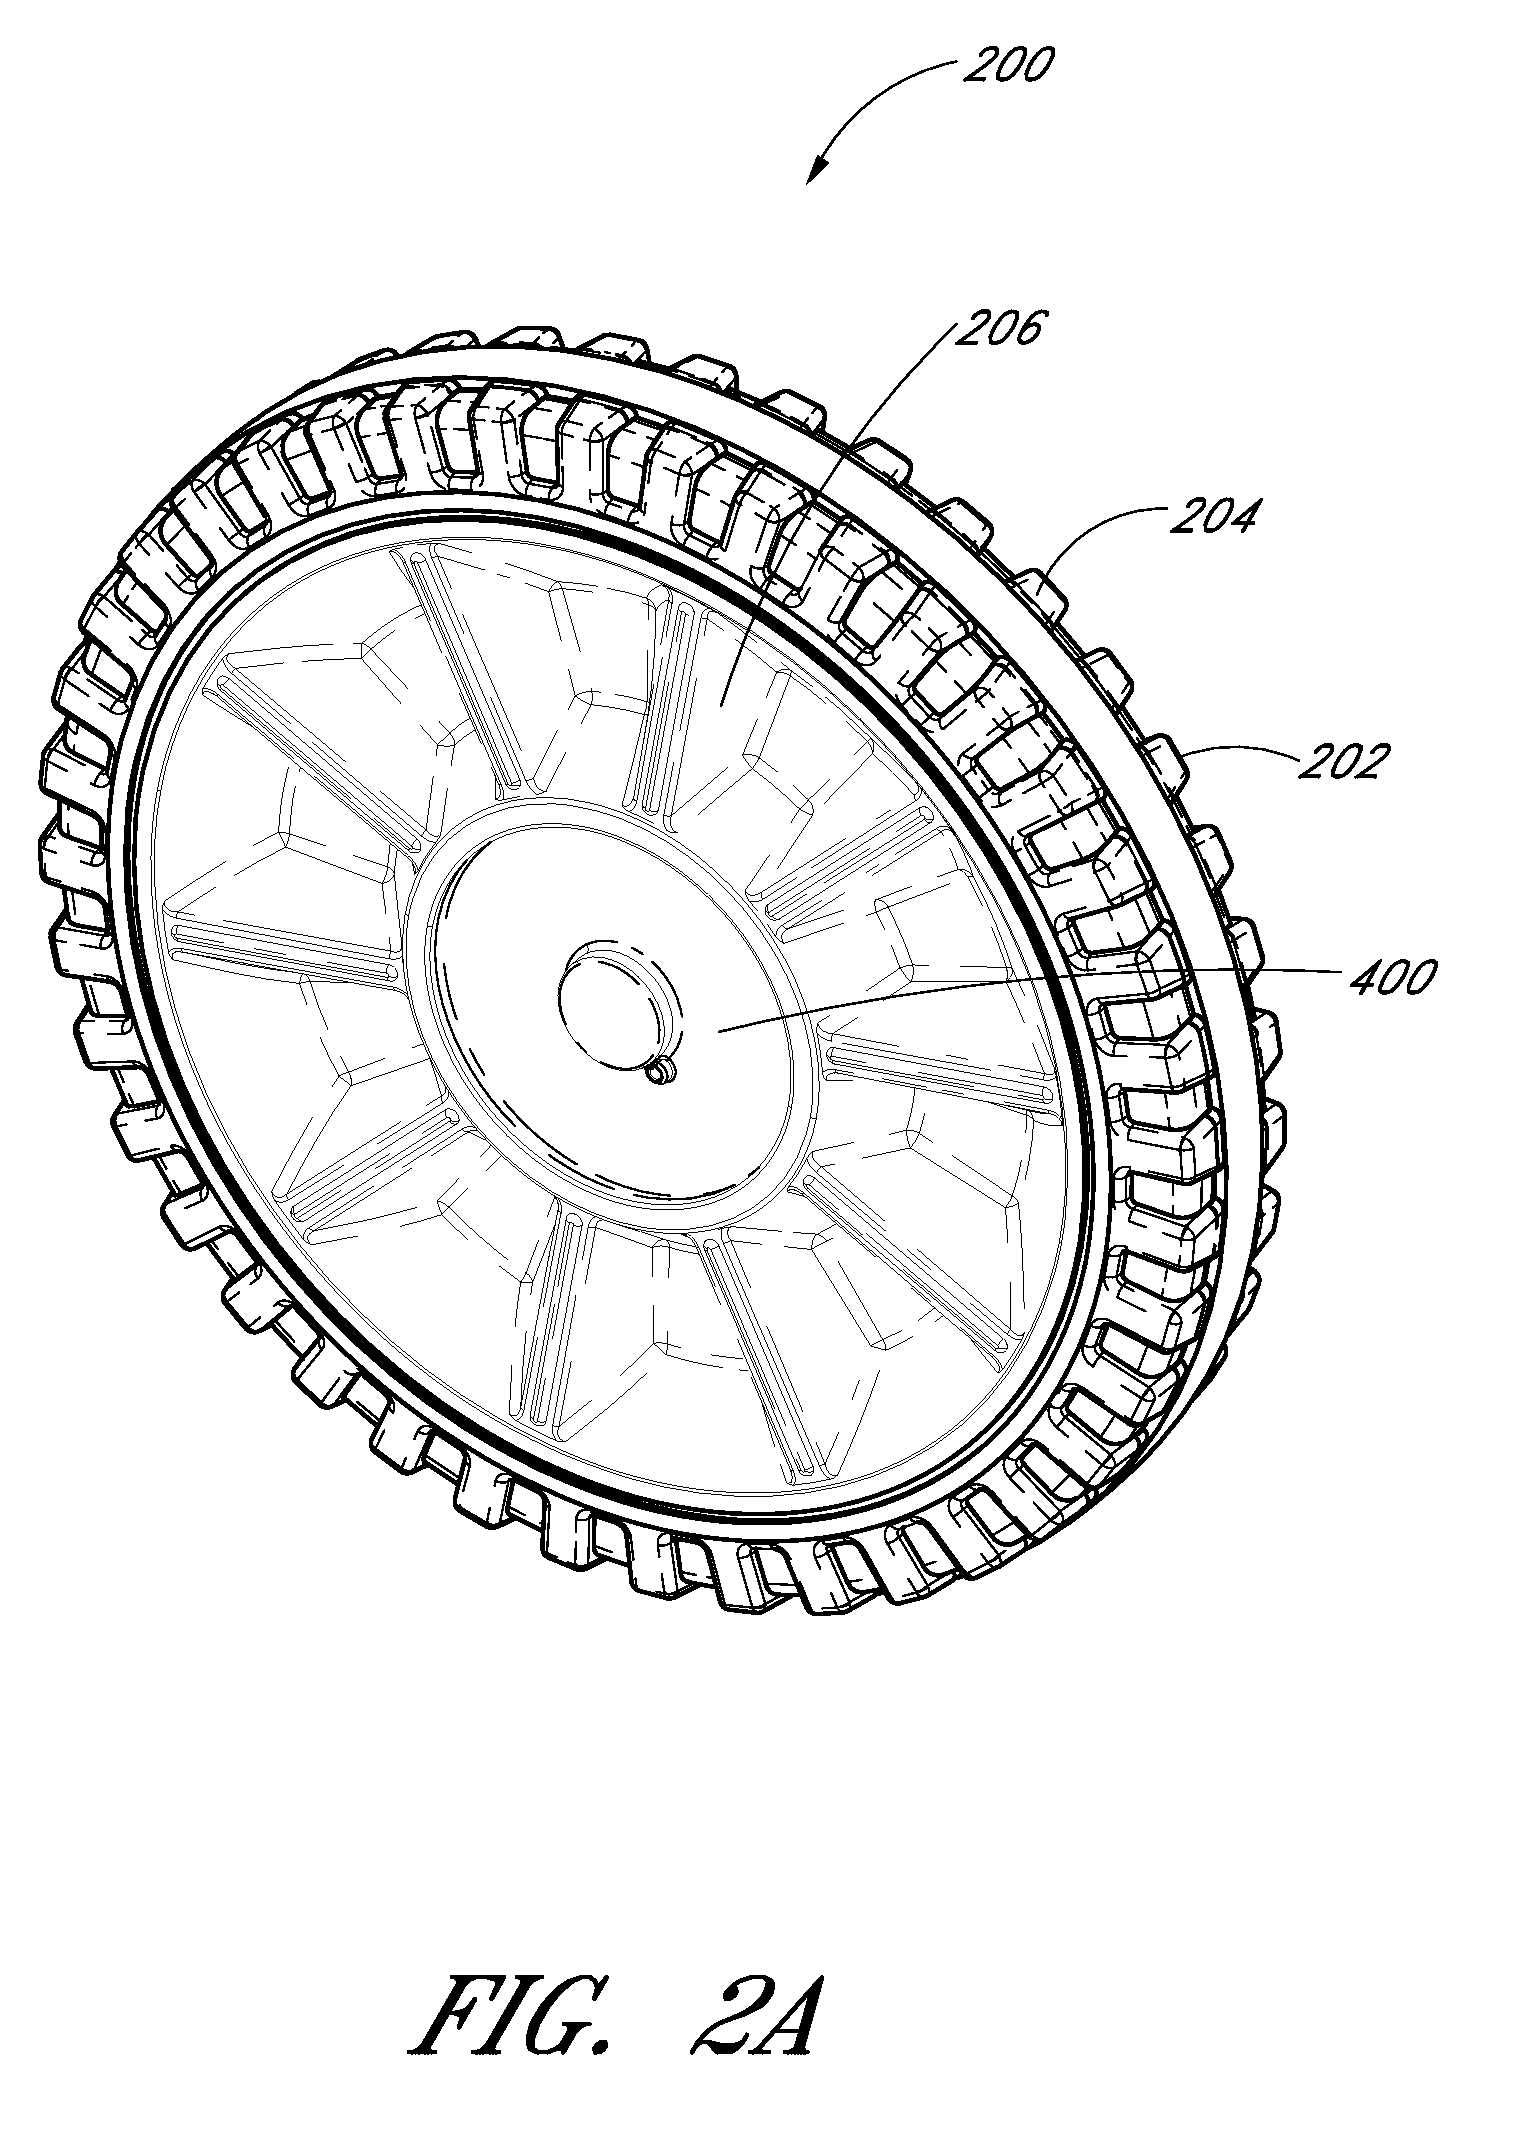 Wheel and hub assembly